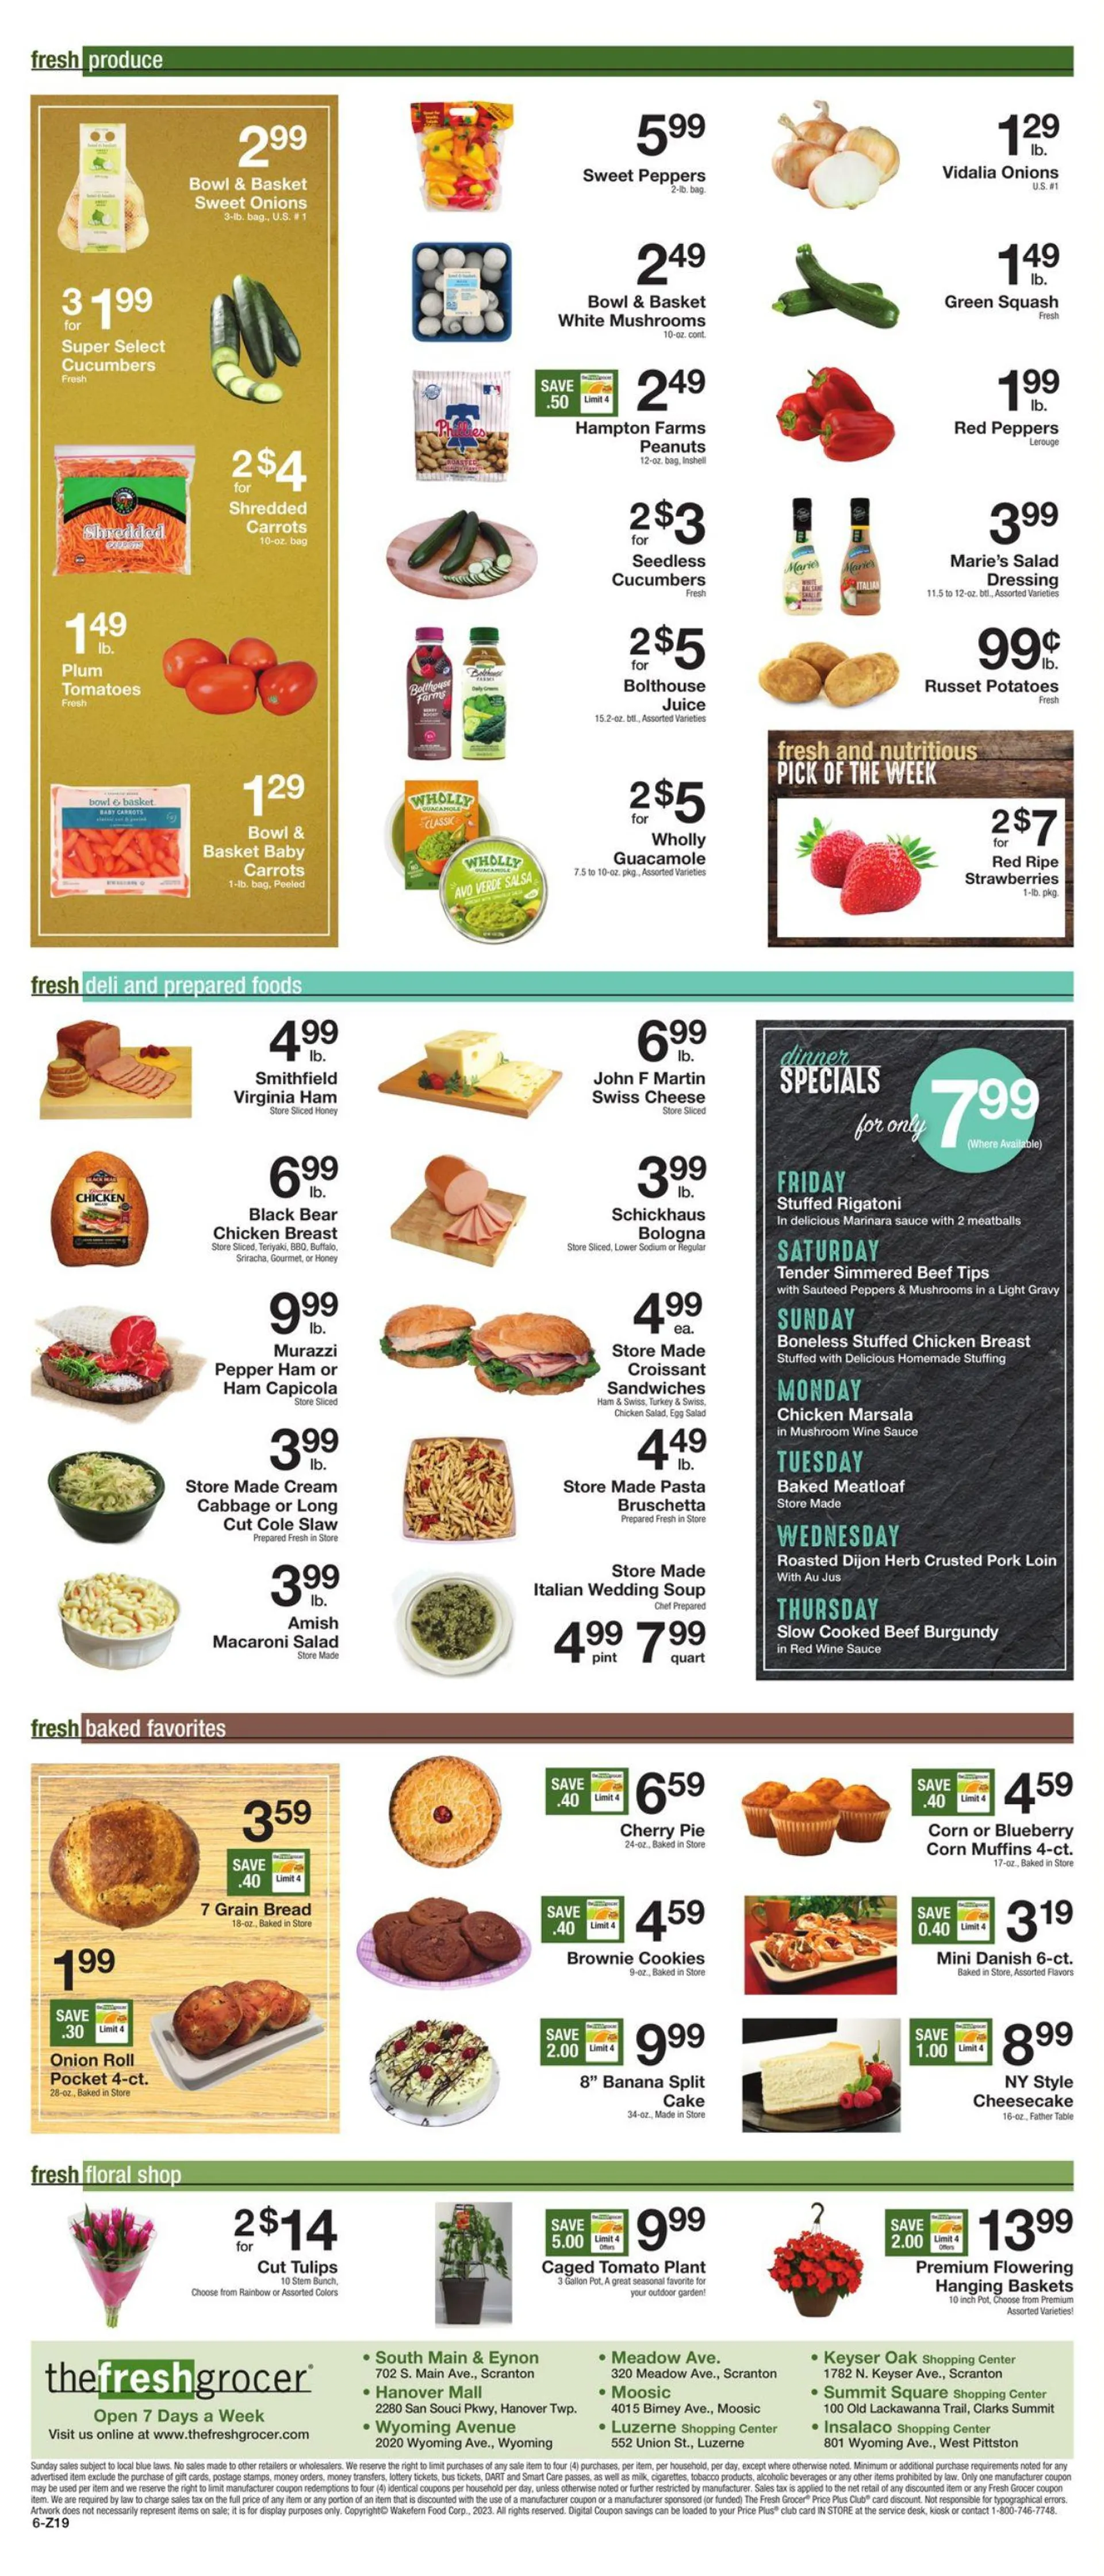 Gerritys Supermarkets Current weekly ad - 6